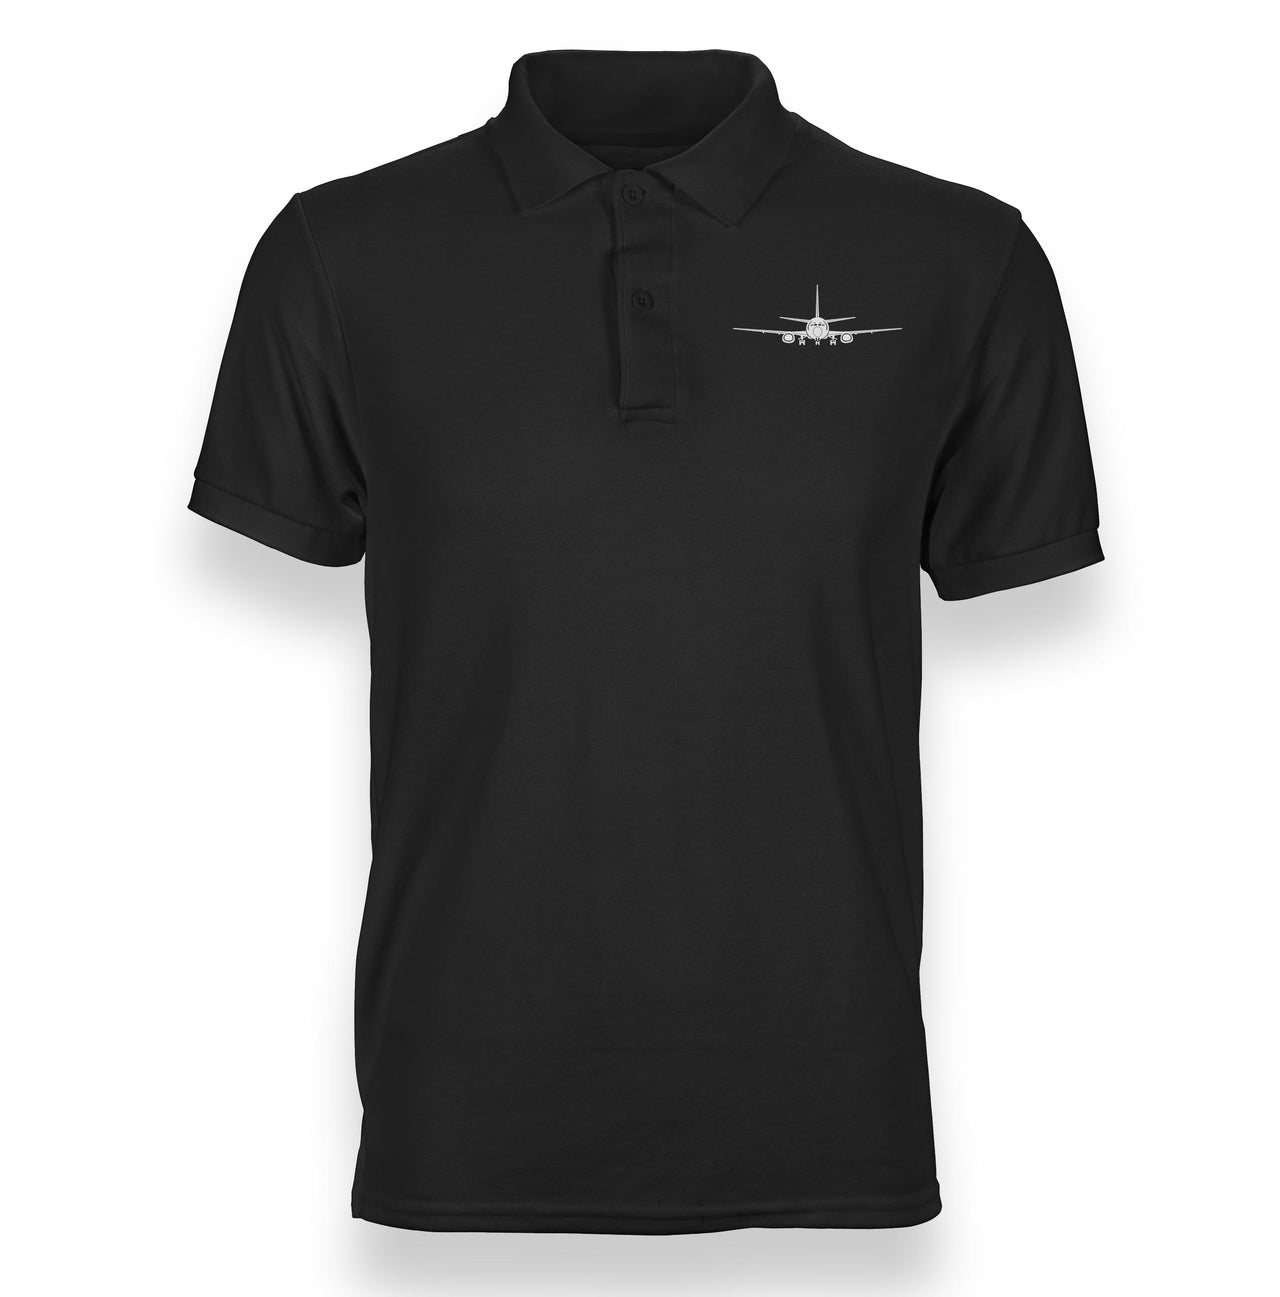 Boeing 737 Silhouette Designed Polo T-Shirts